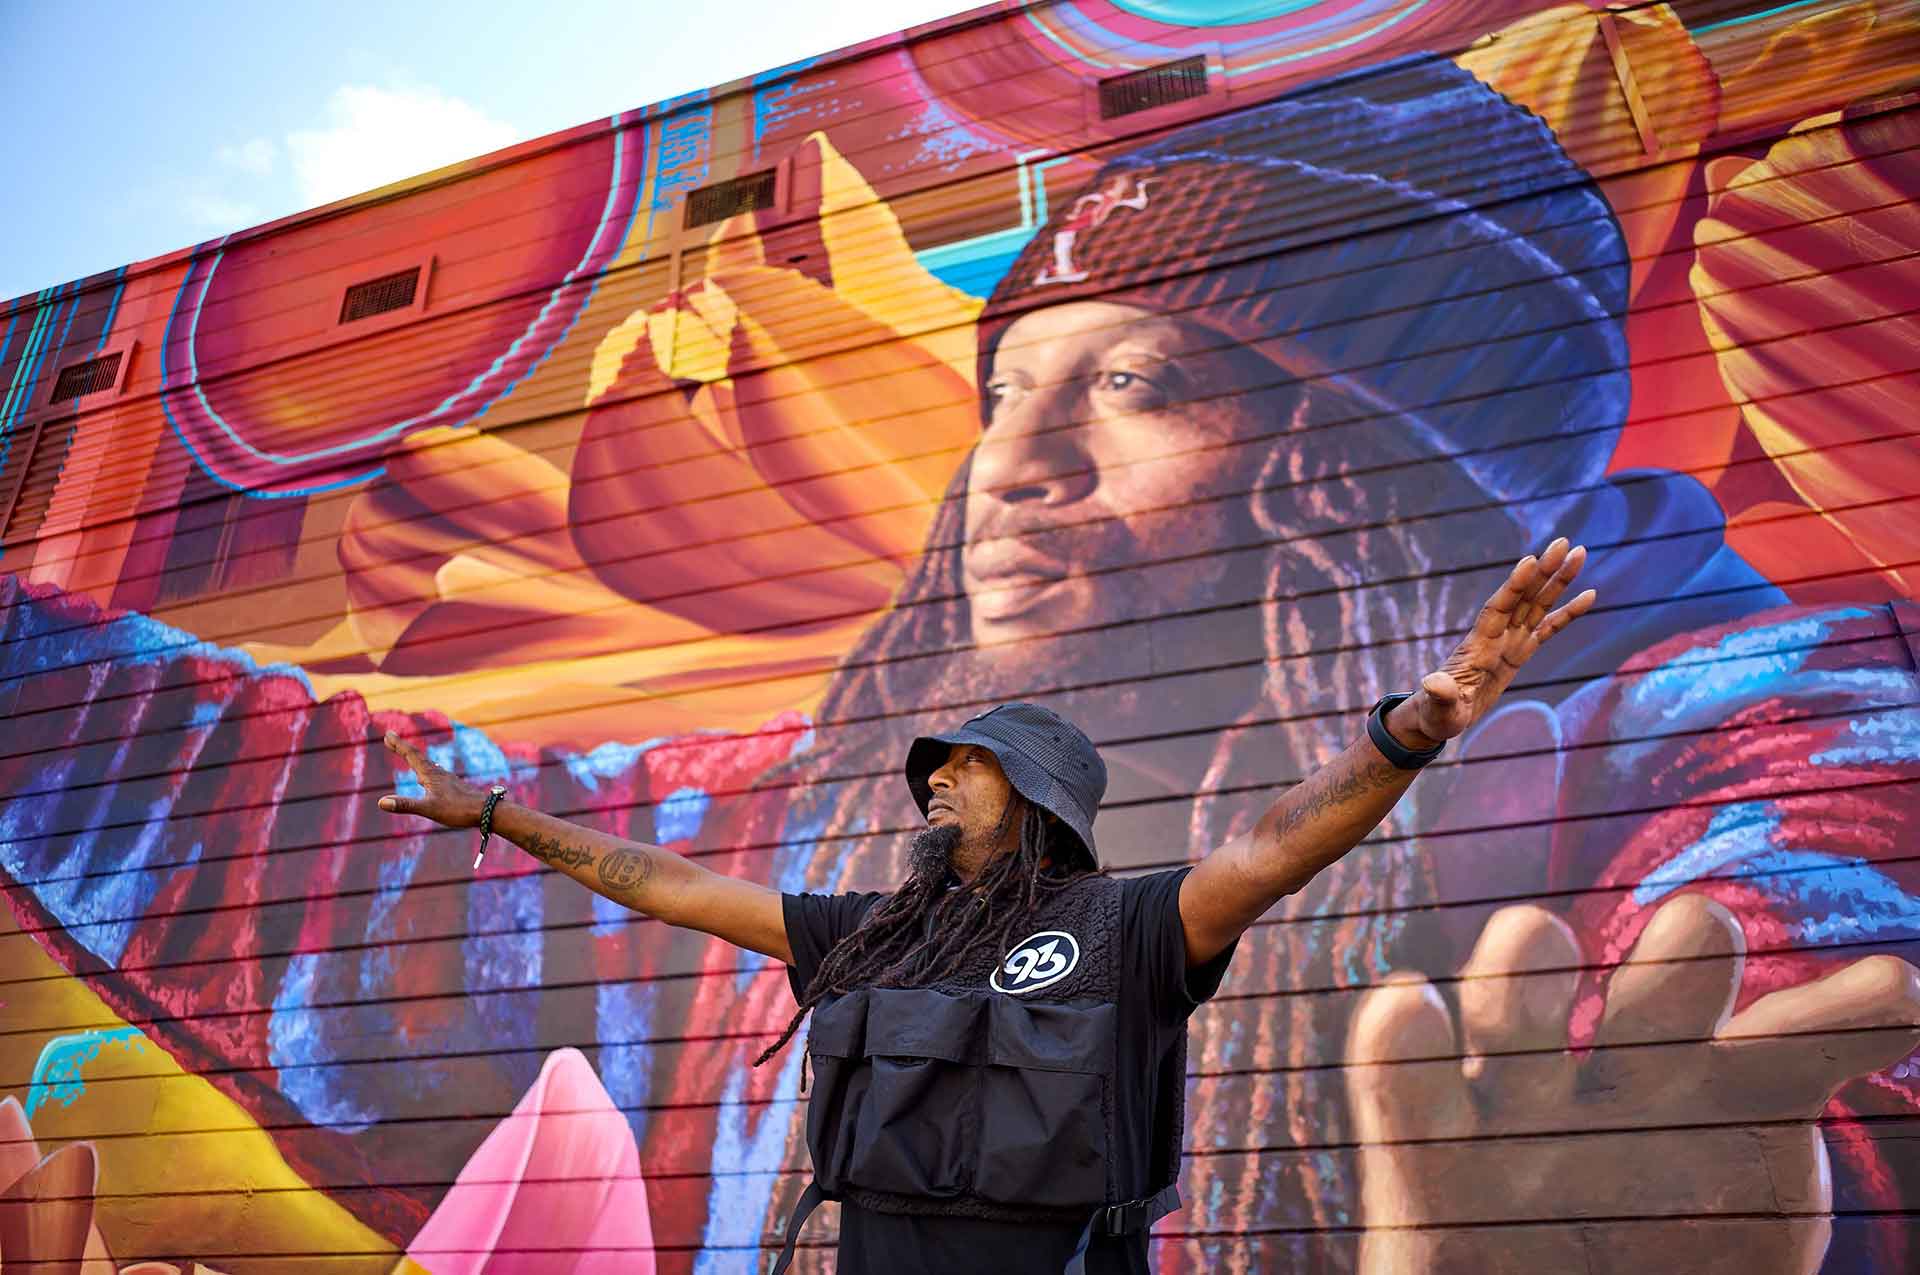 A-Plus of Souls of Mischief poses in front of his own likeness, painted as part of a mural in East Oakland.